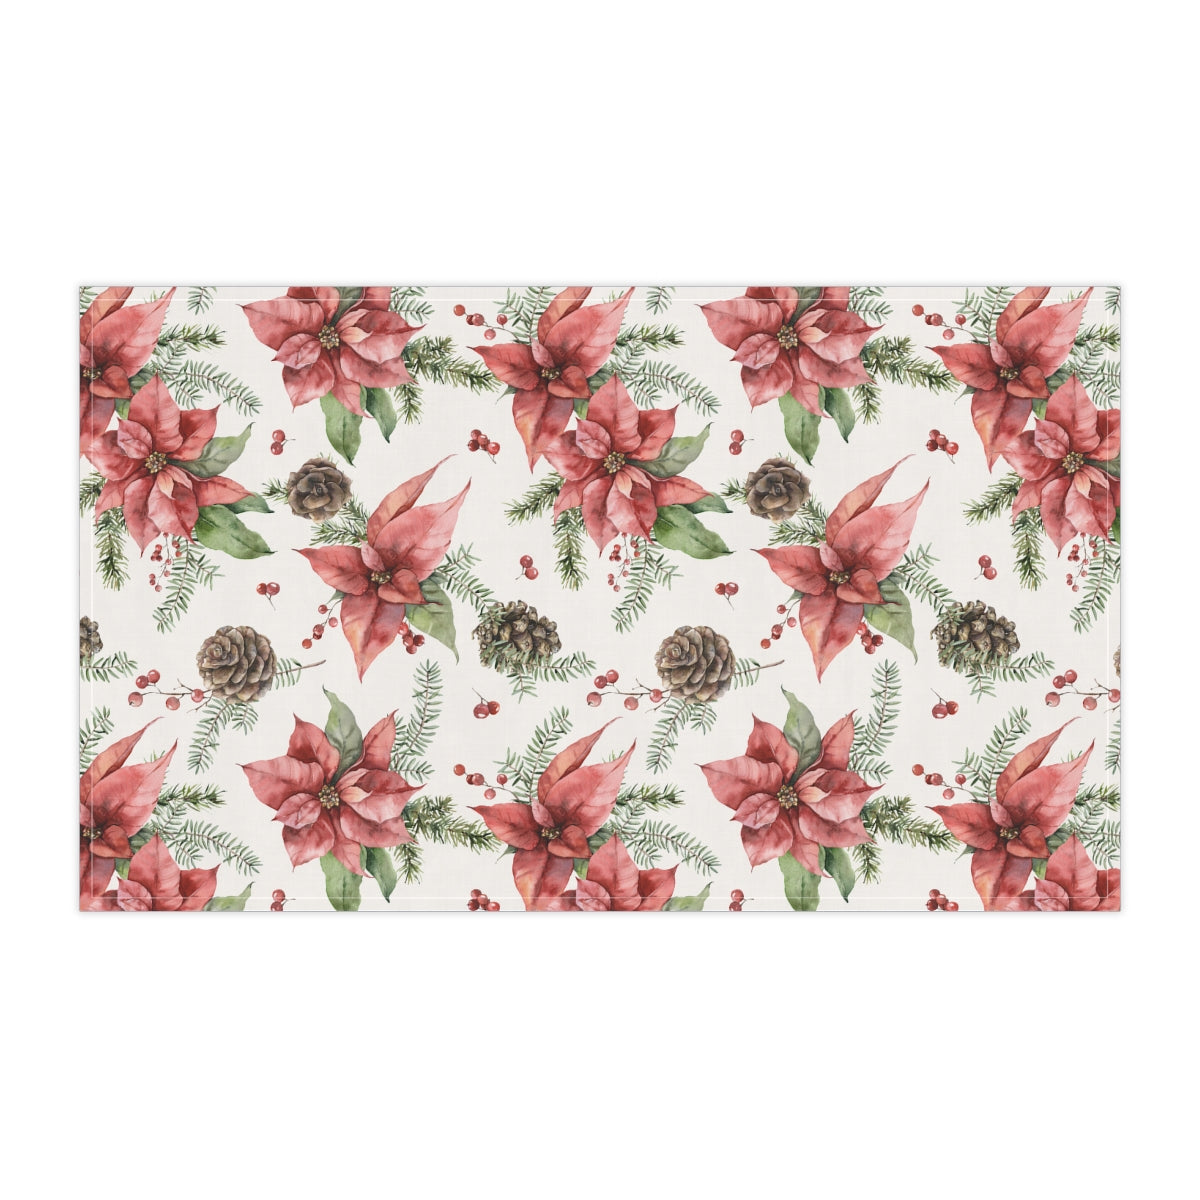 Poinsettia and Pine Cones Kitchen Towel